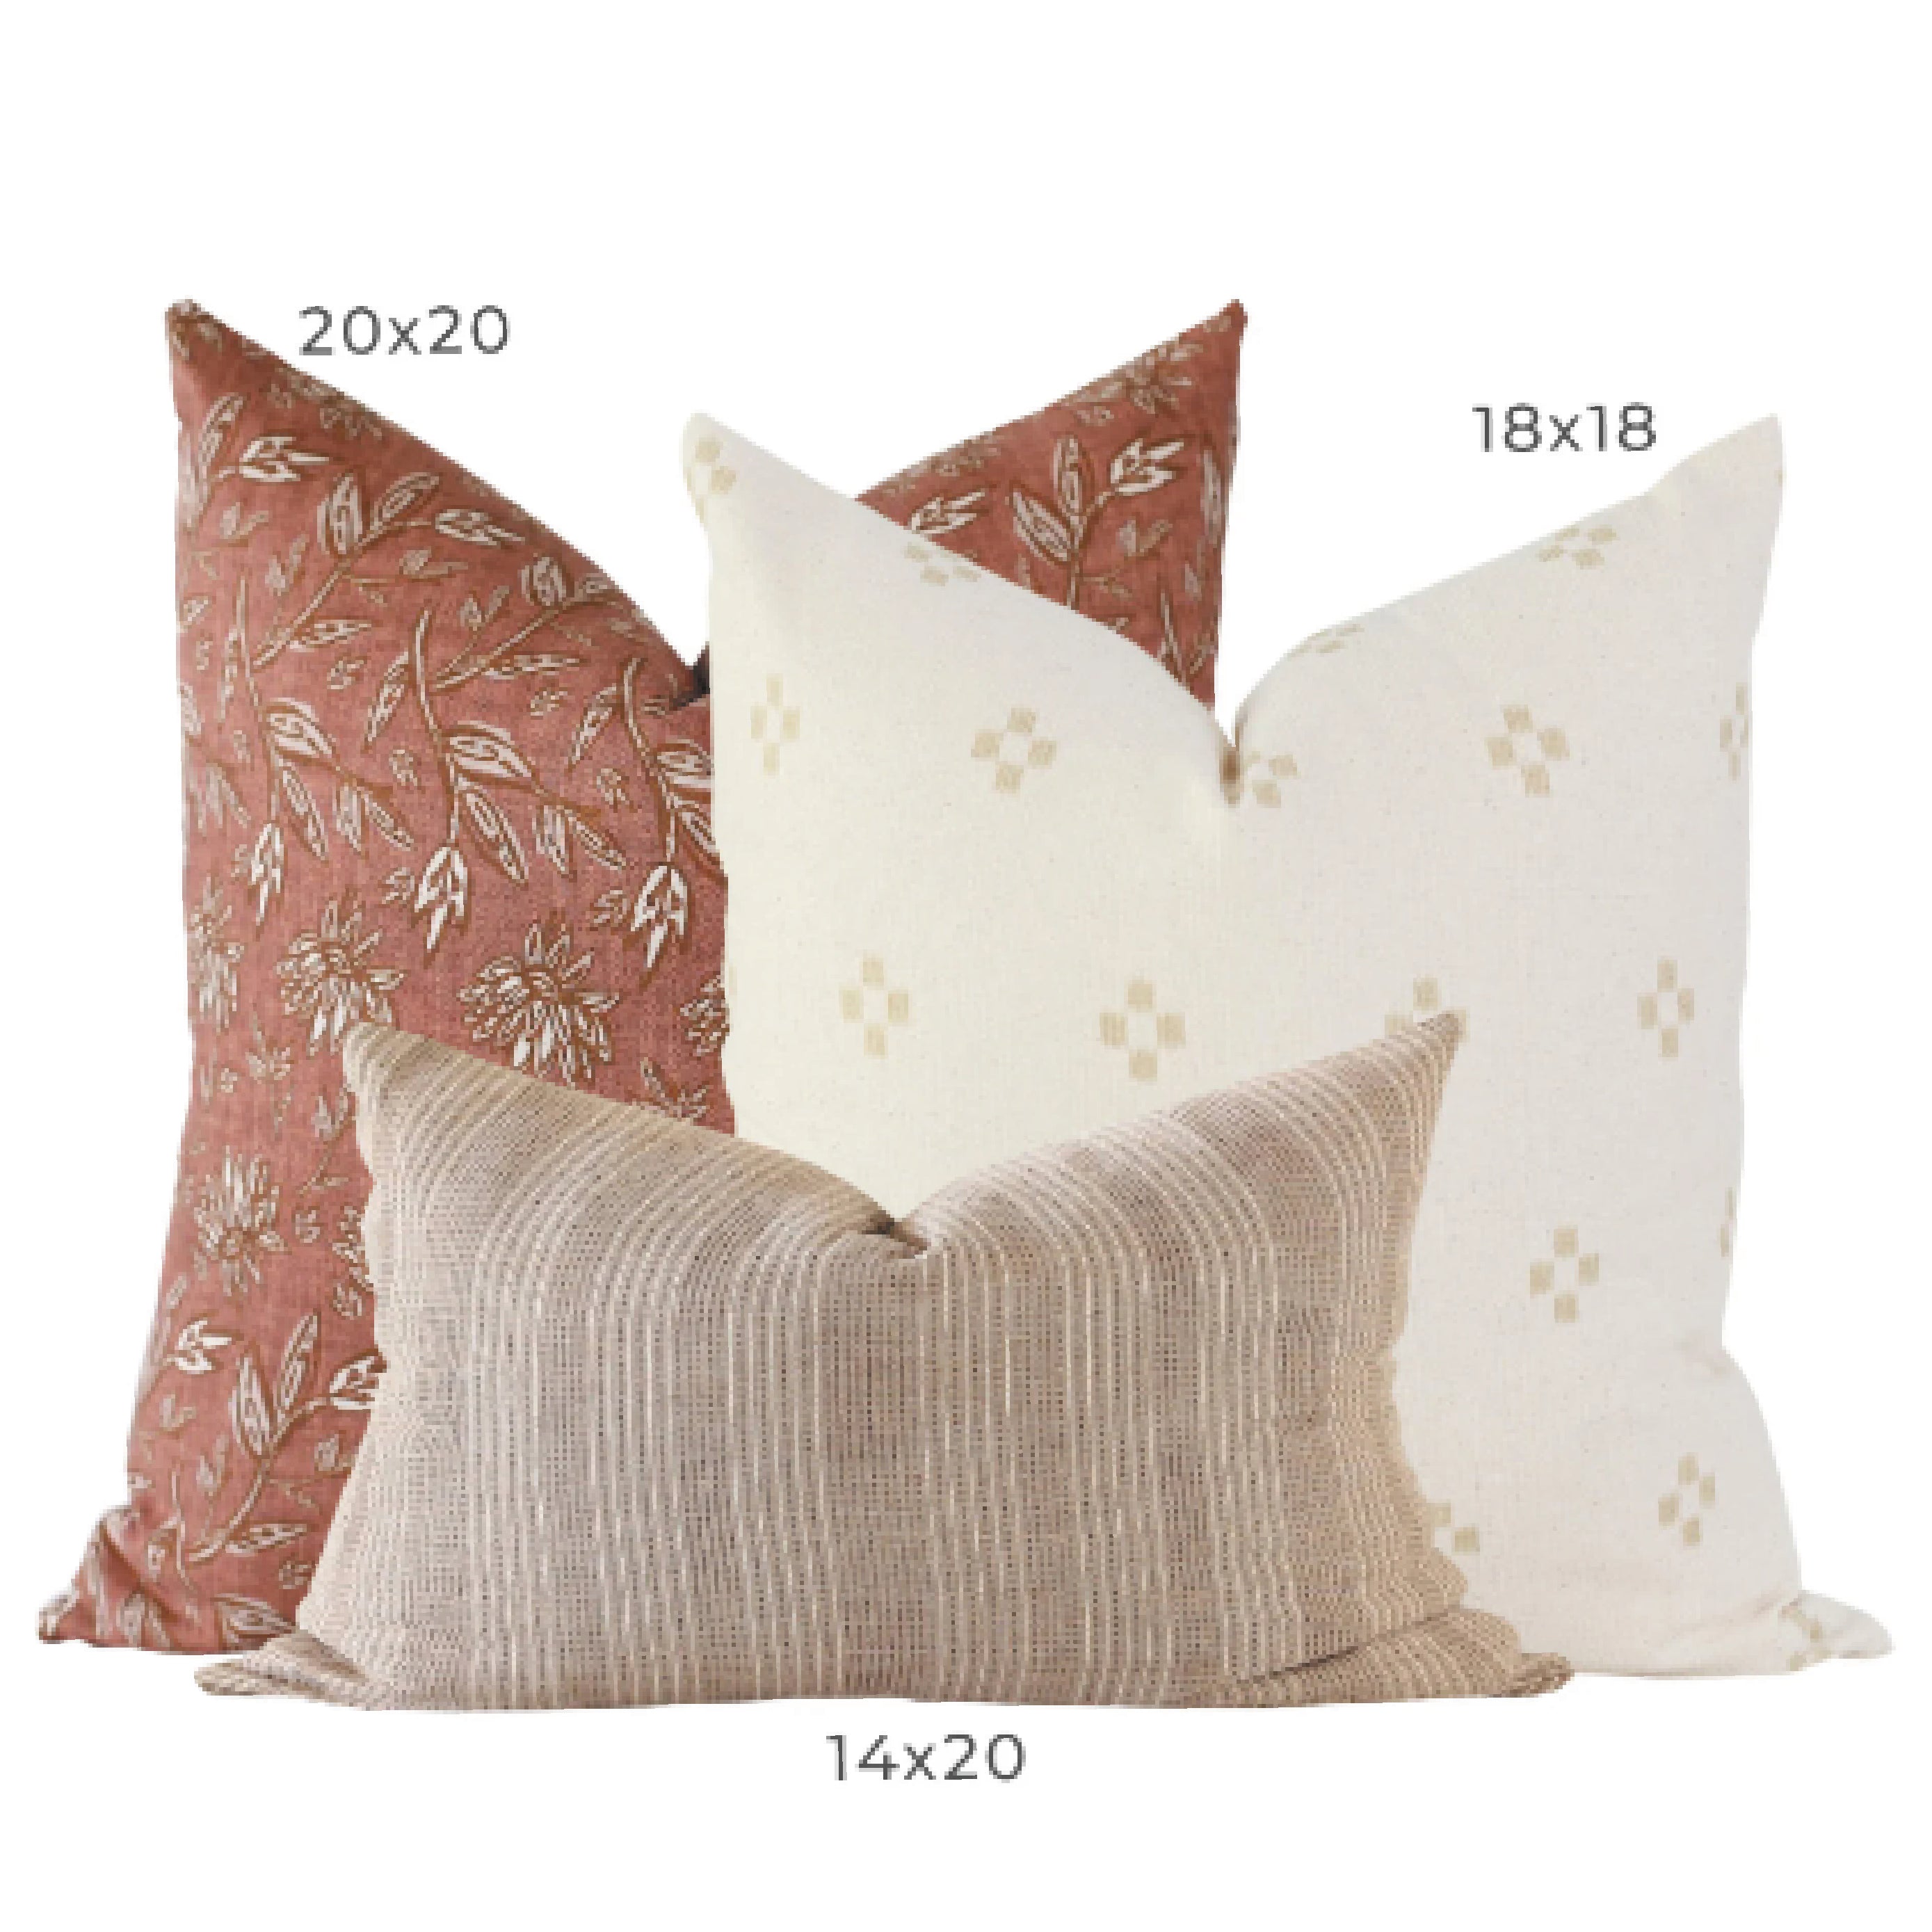 Throw Pillow Cover Sets  Bed, Couch Pillow Combinations